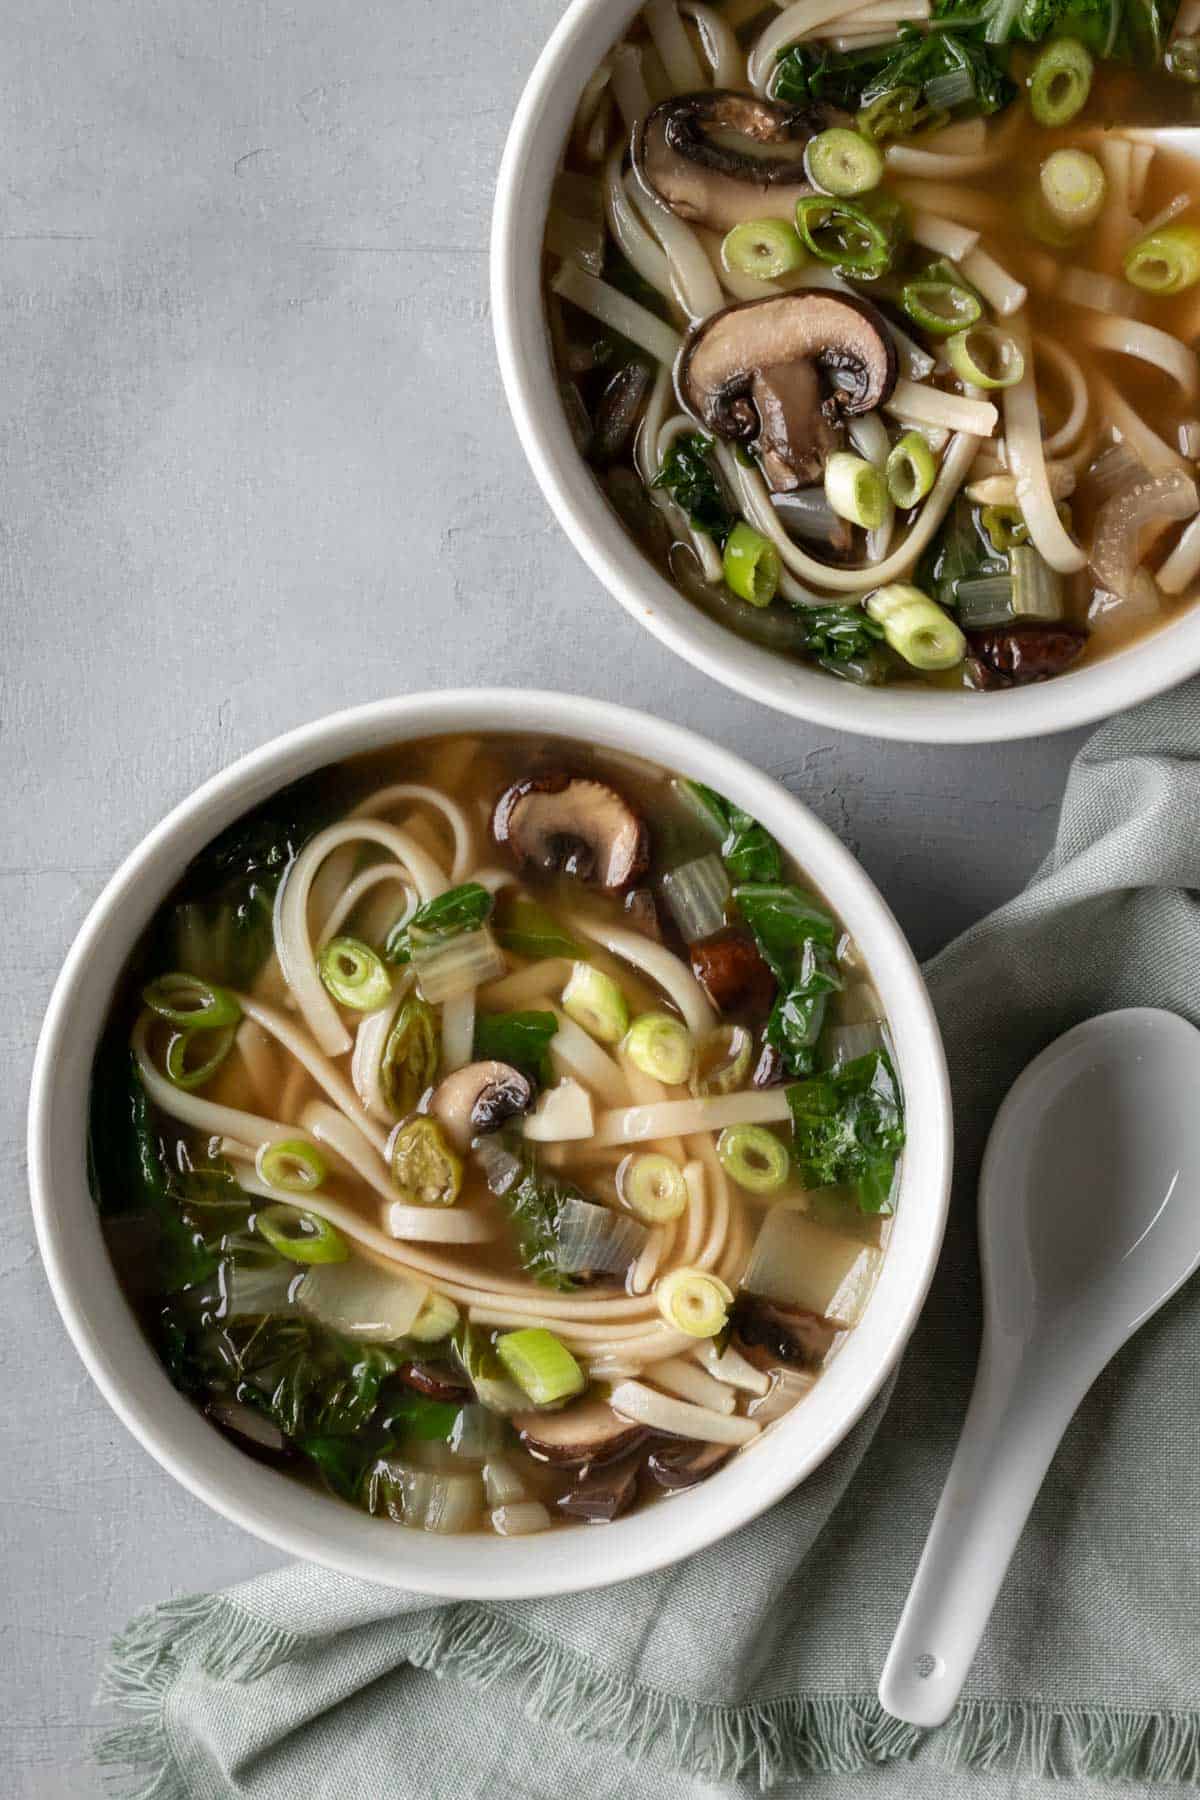 Two bowls of noodle and bok choy soup against a gray background.